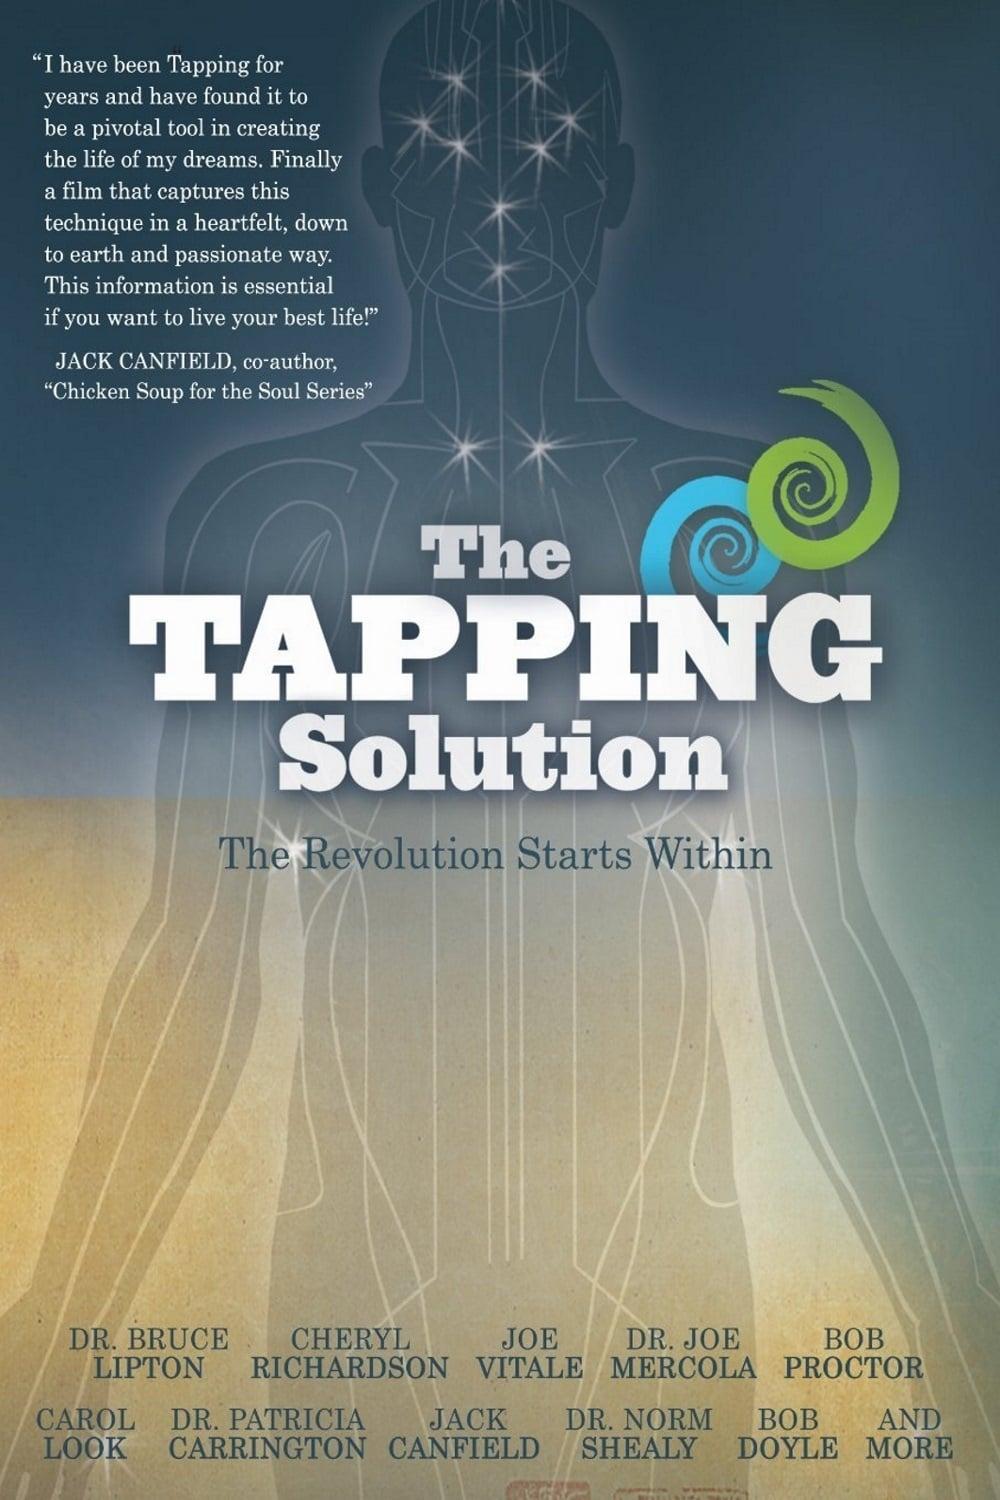 The Tapping Solution poster